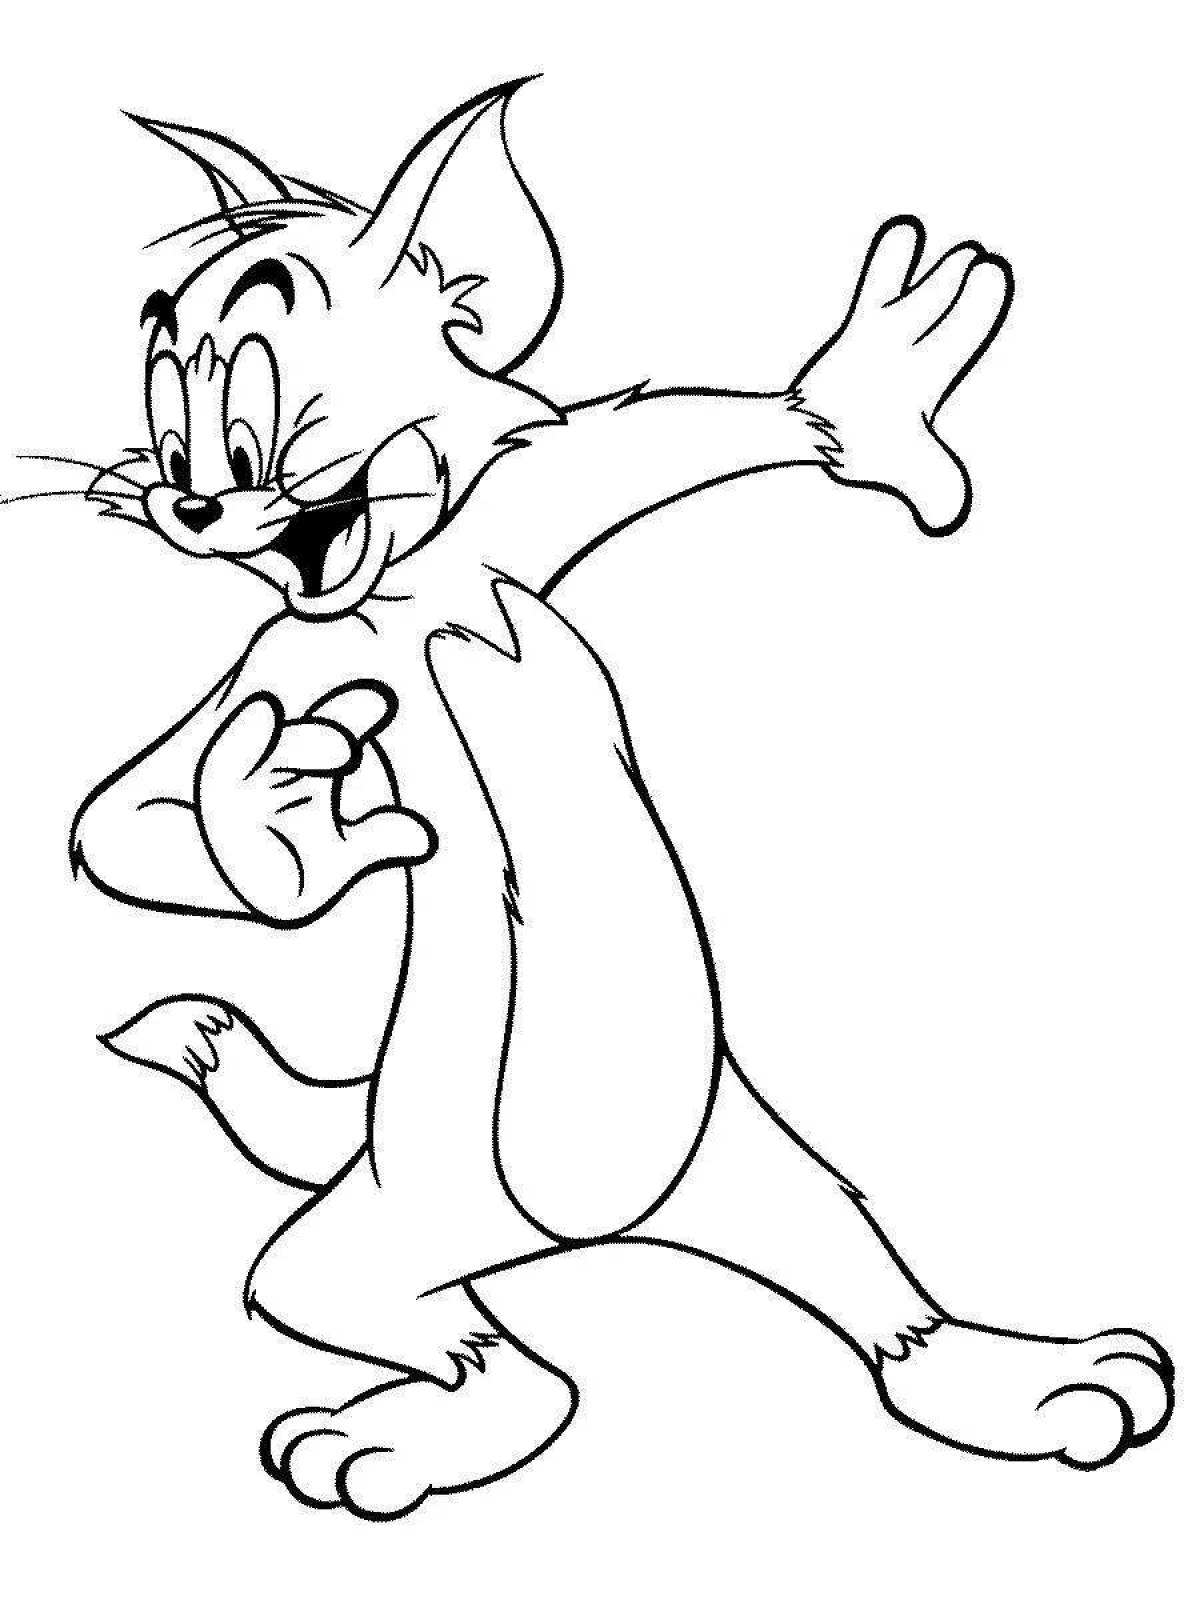 Animated tom cat coloring page